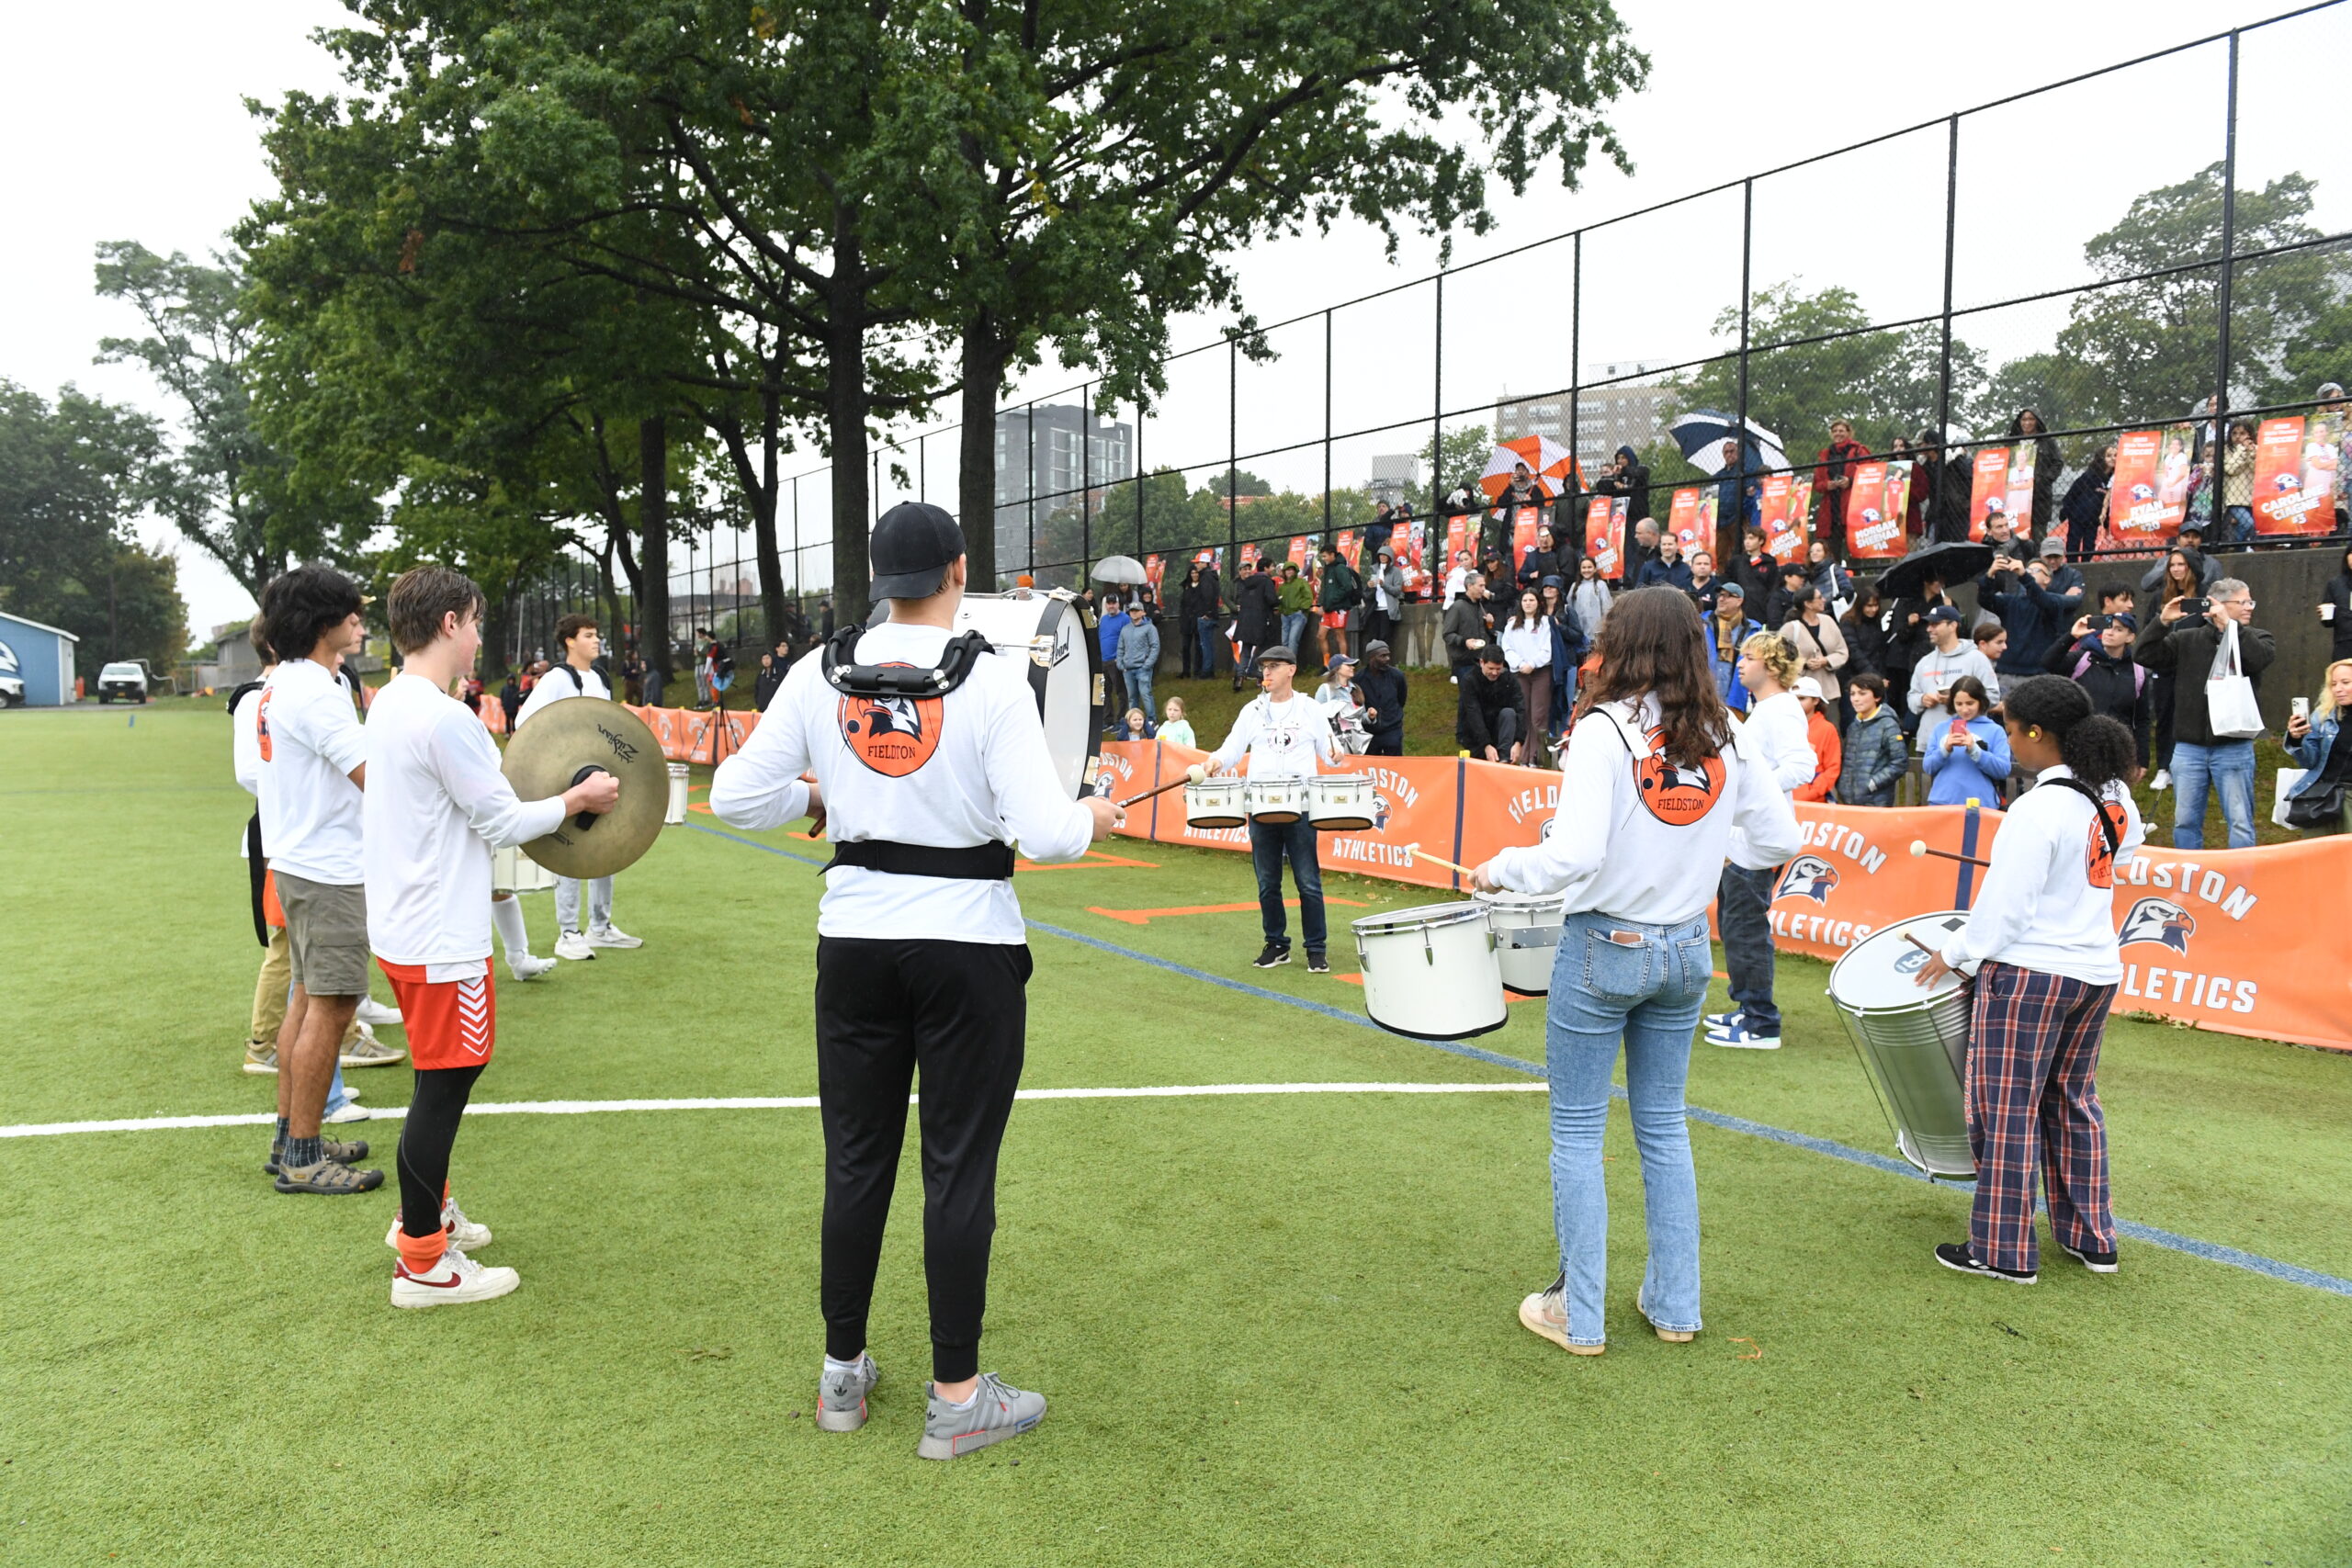 The Fieldston percussion ensemble performs in front of community members